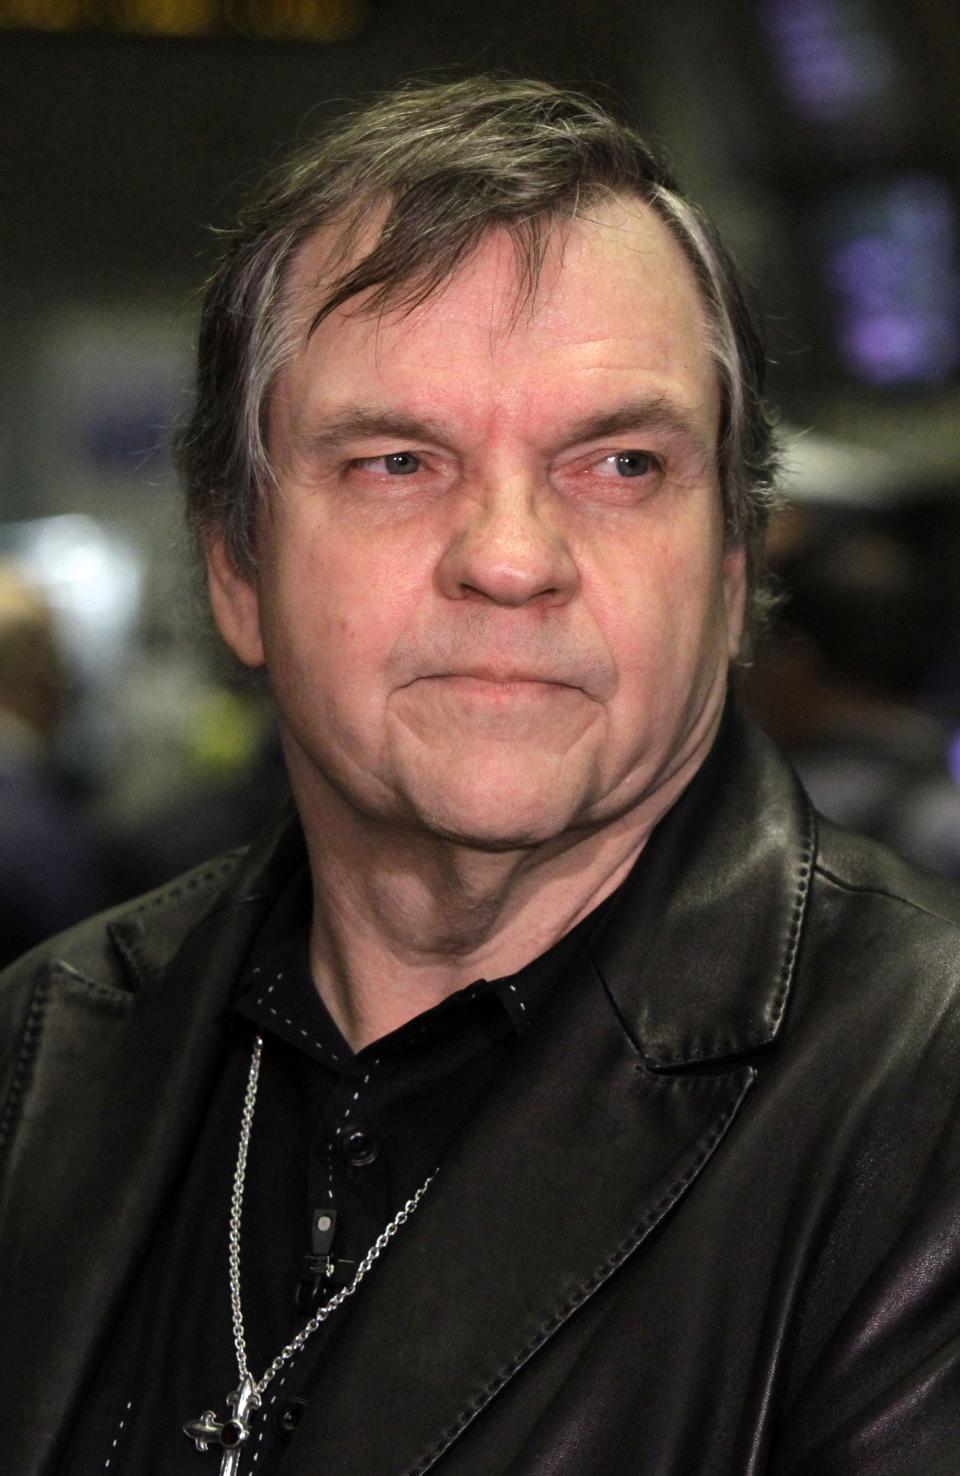 FILE - This June 21, 2010, file photo shows rock singer Meat Loaf on the floor of the New York Stock Exchange before ringing the opening bell. Meat Loaf, whose "Bat Out Of Hell" album is one of the all time bestsellers, has died, family said on Facebook, Friday, Jan. 21, 2022. (AP Photo/Richard Drew, File)